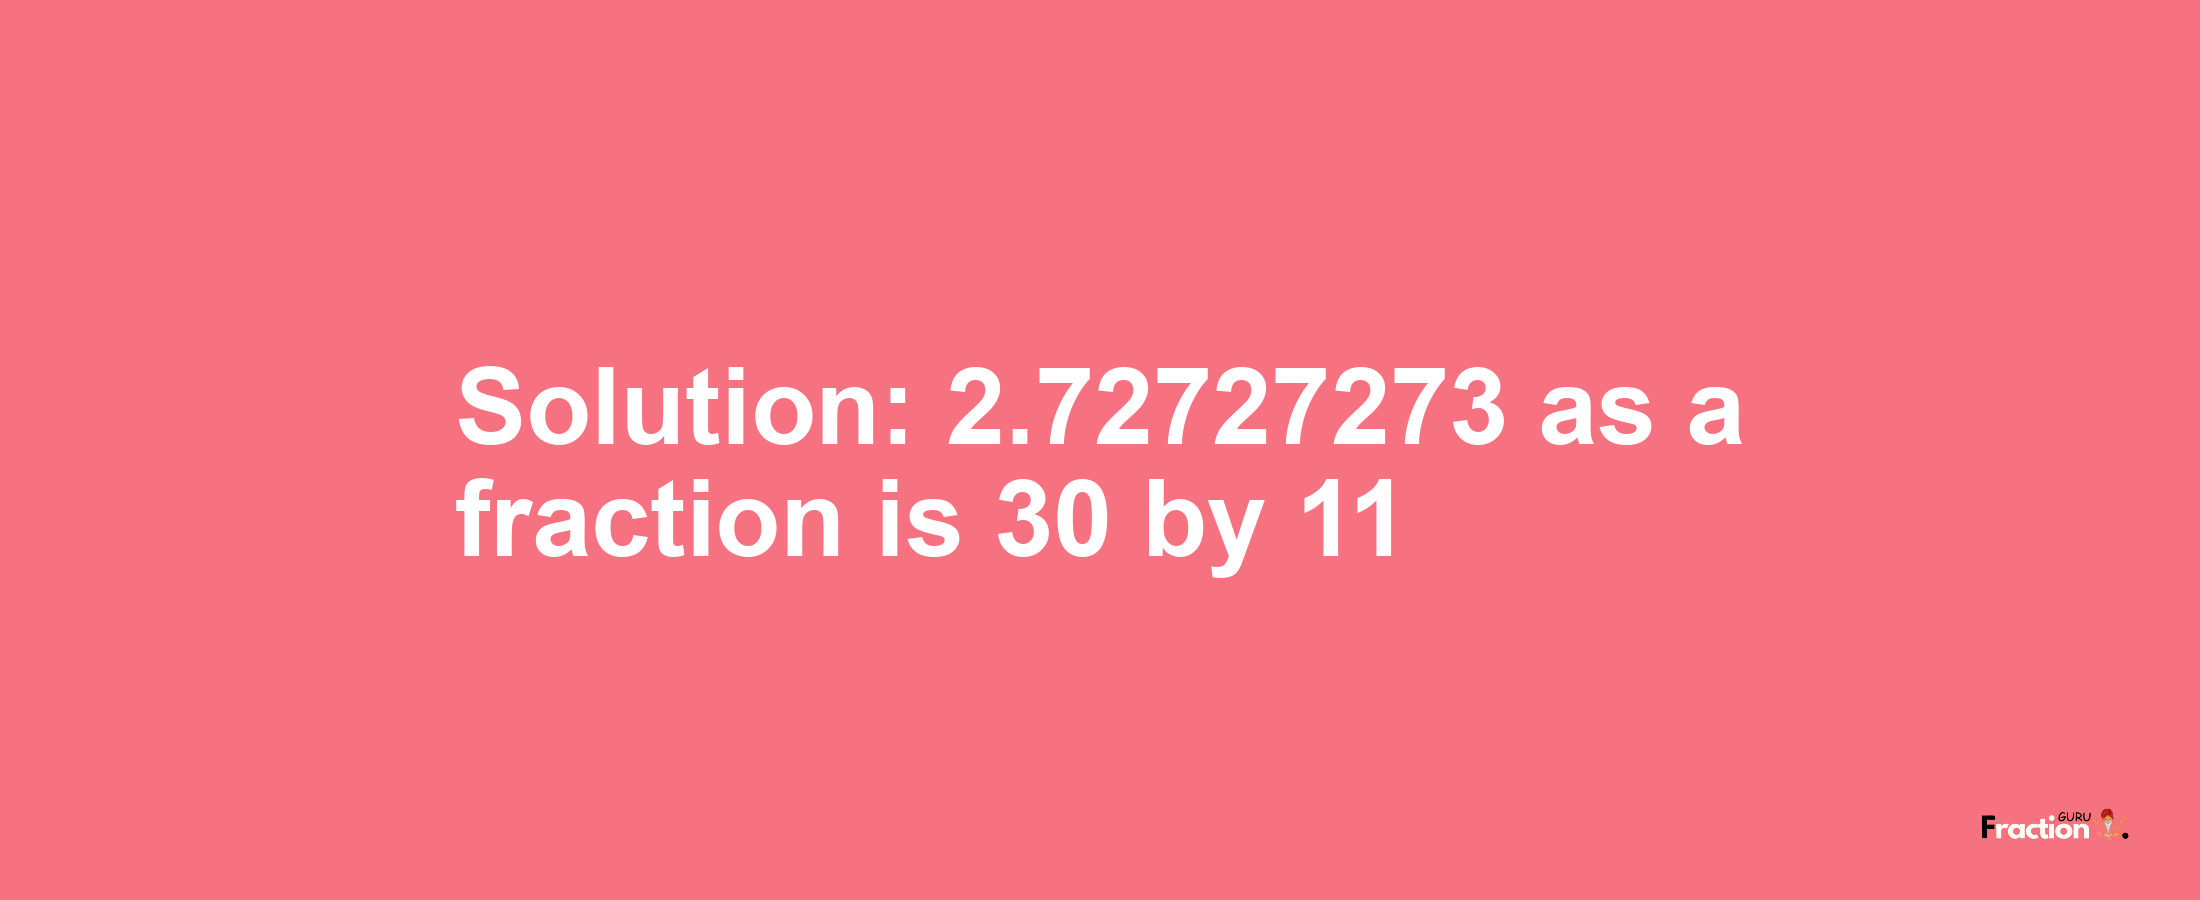 Solution:2.72727273 as a fraction is 30/11